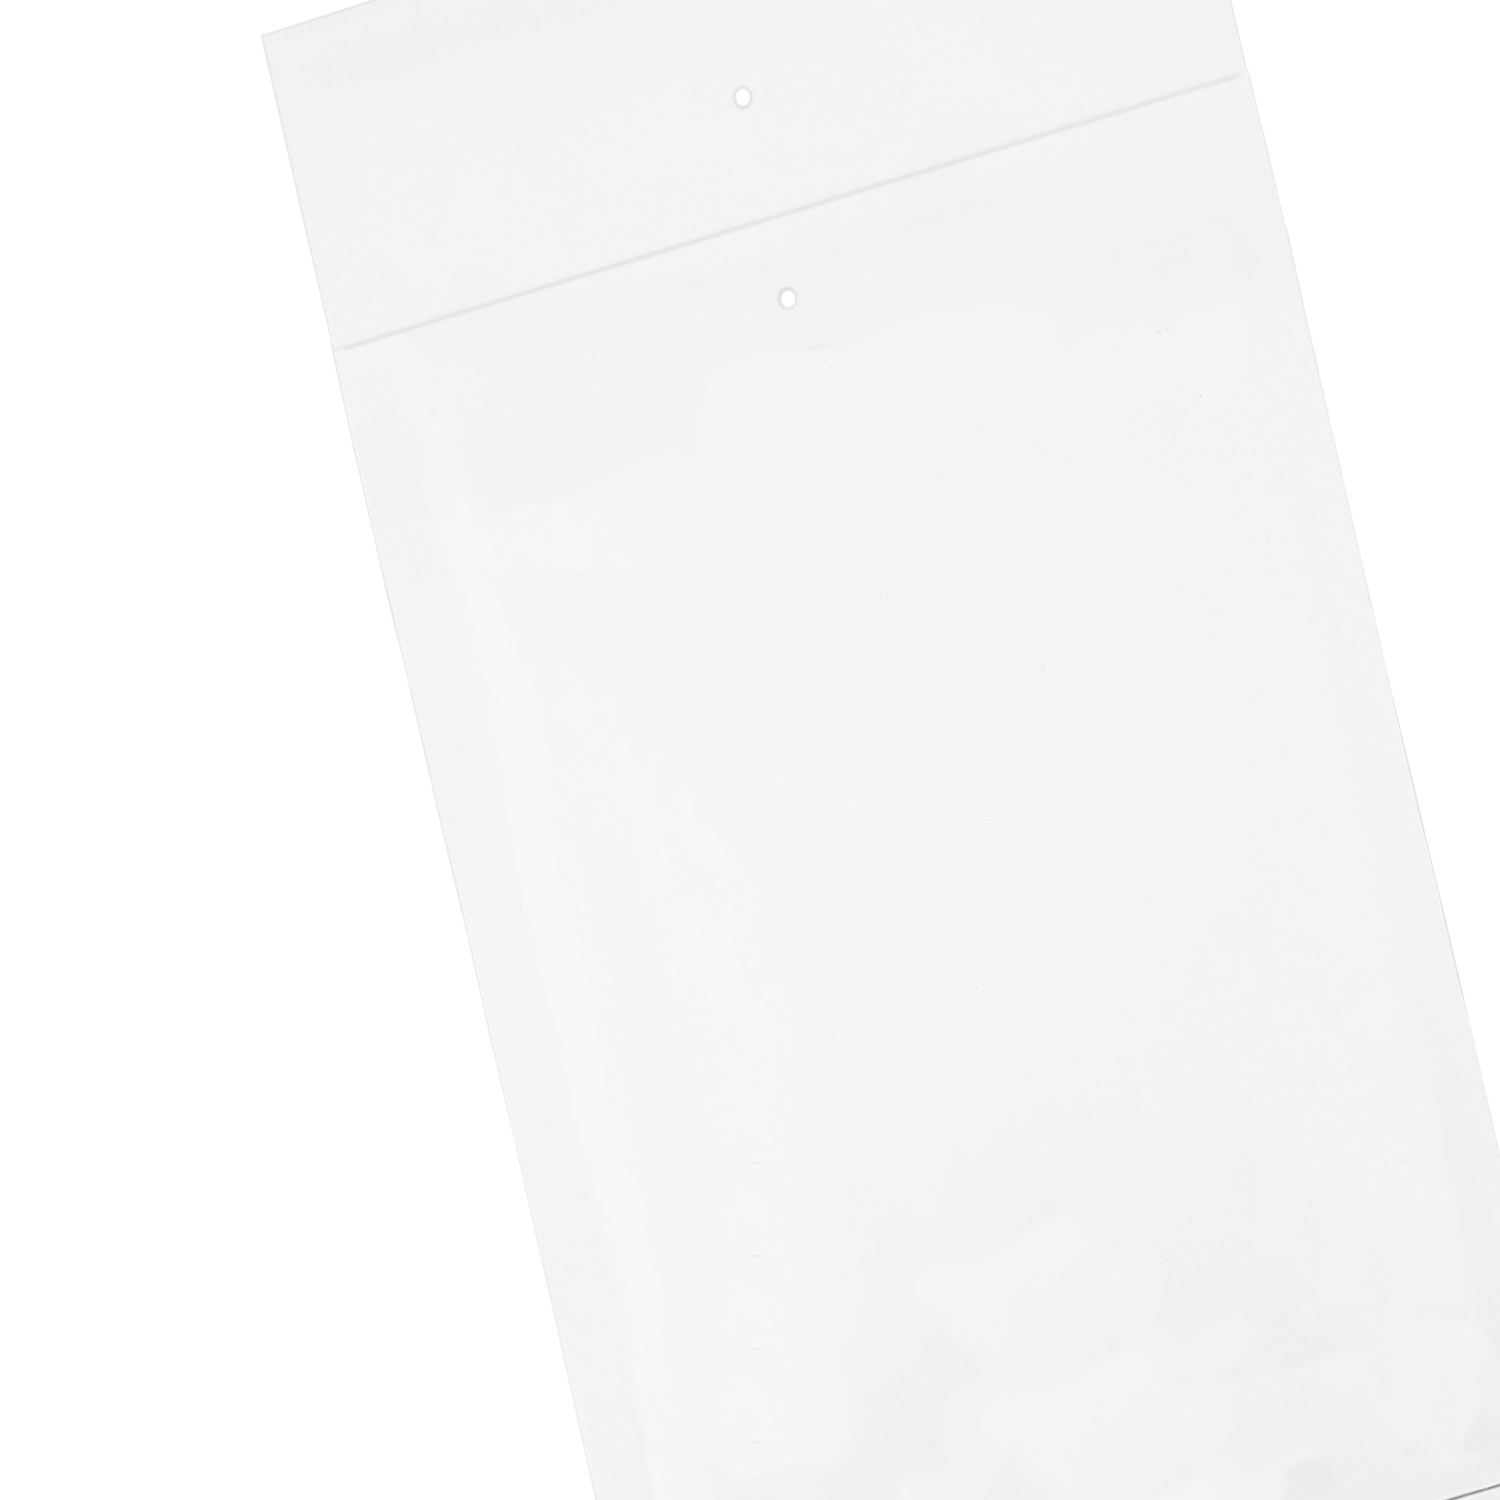 100 DIN Lang bubble mailers white 125 x 235mm